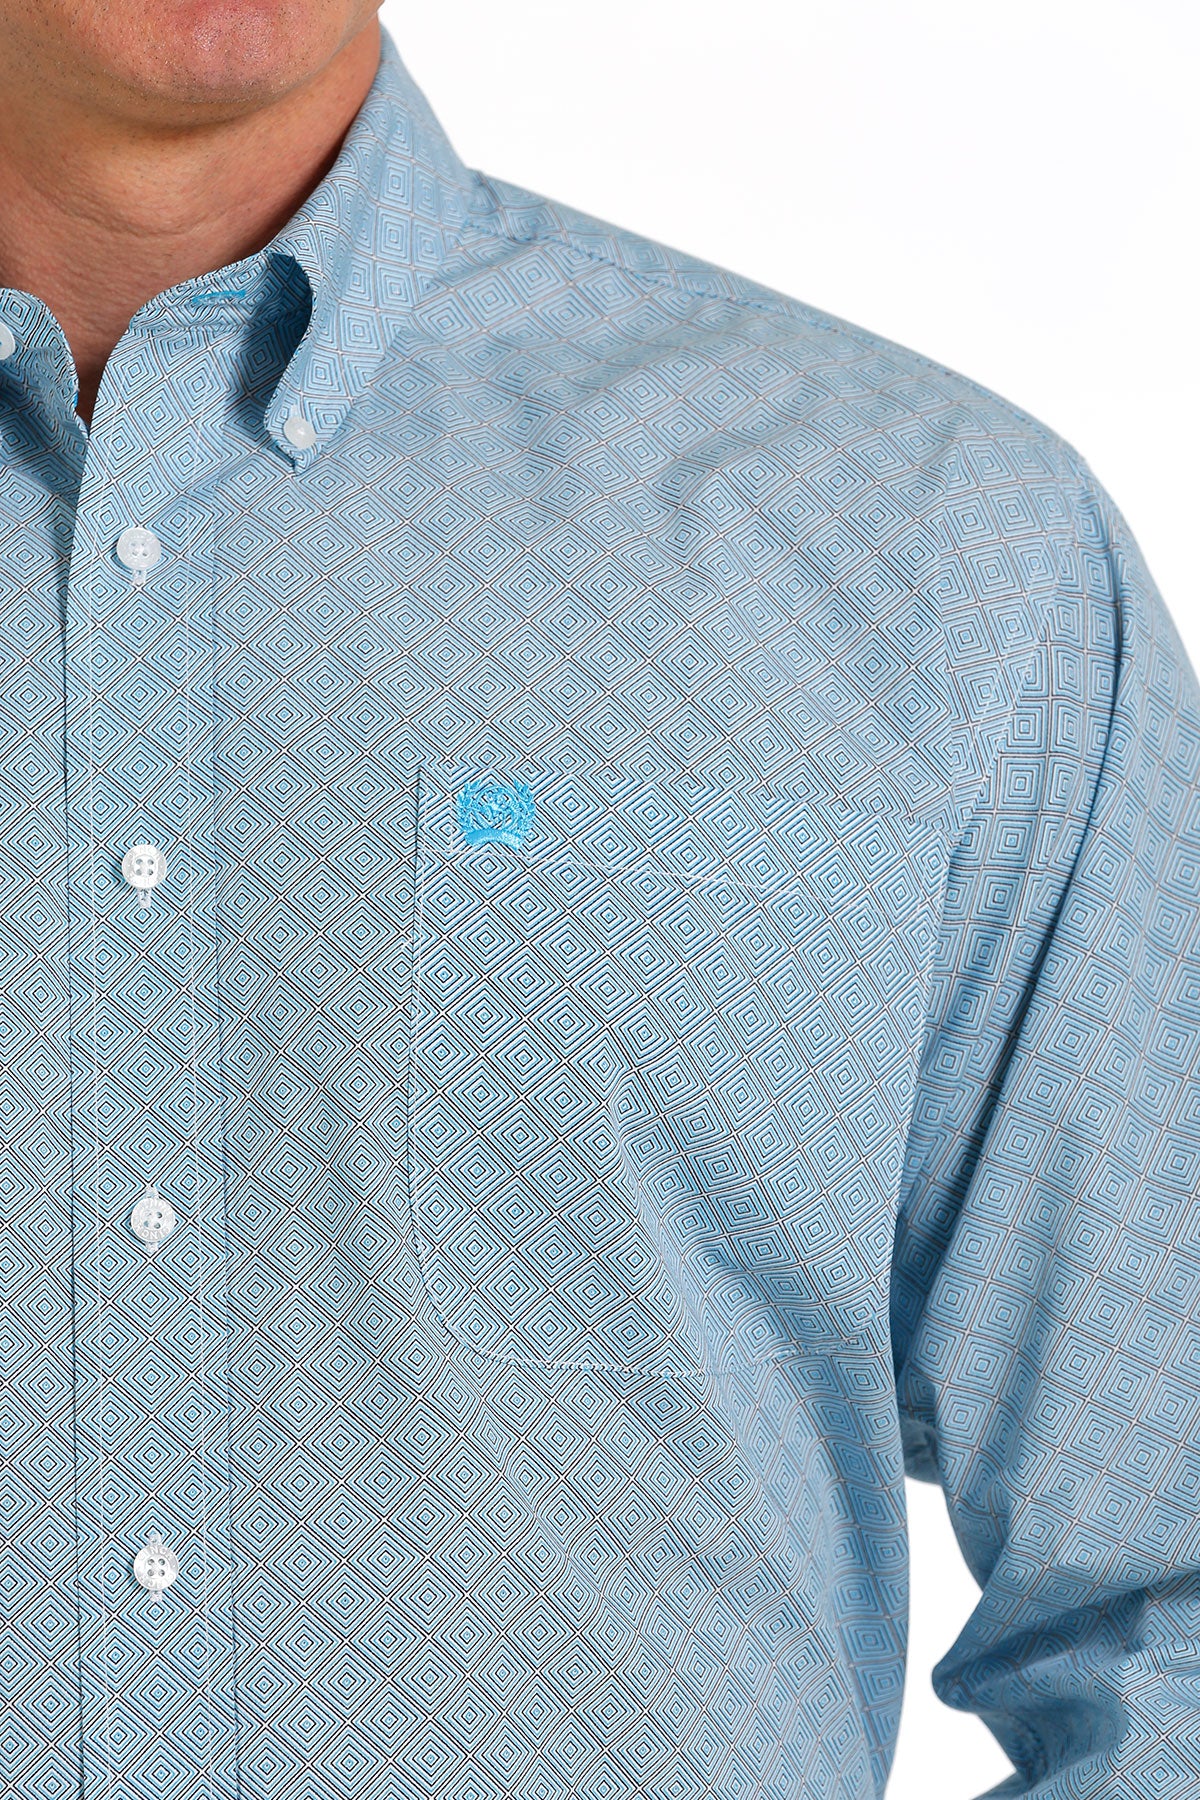 CINCH MENS TURQUOISE LONG SLEEVE BUTTON UP SHIRT